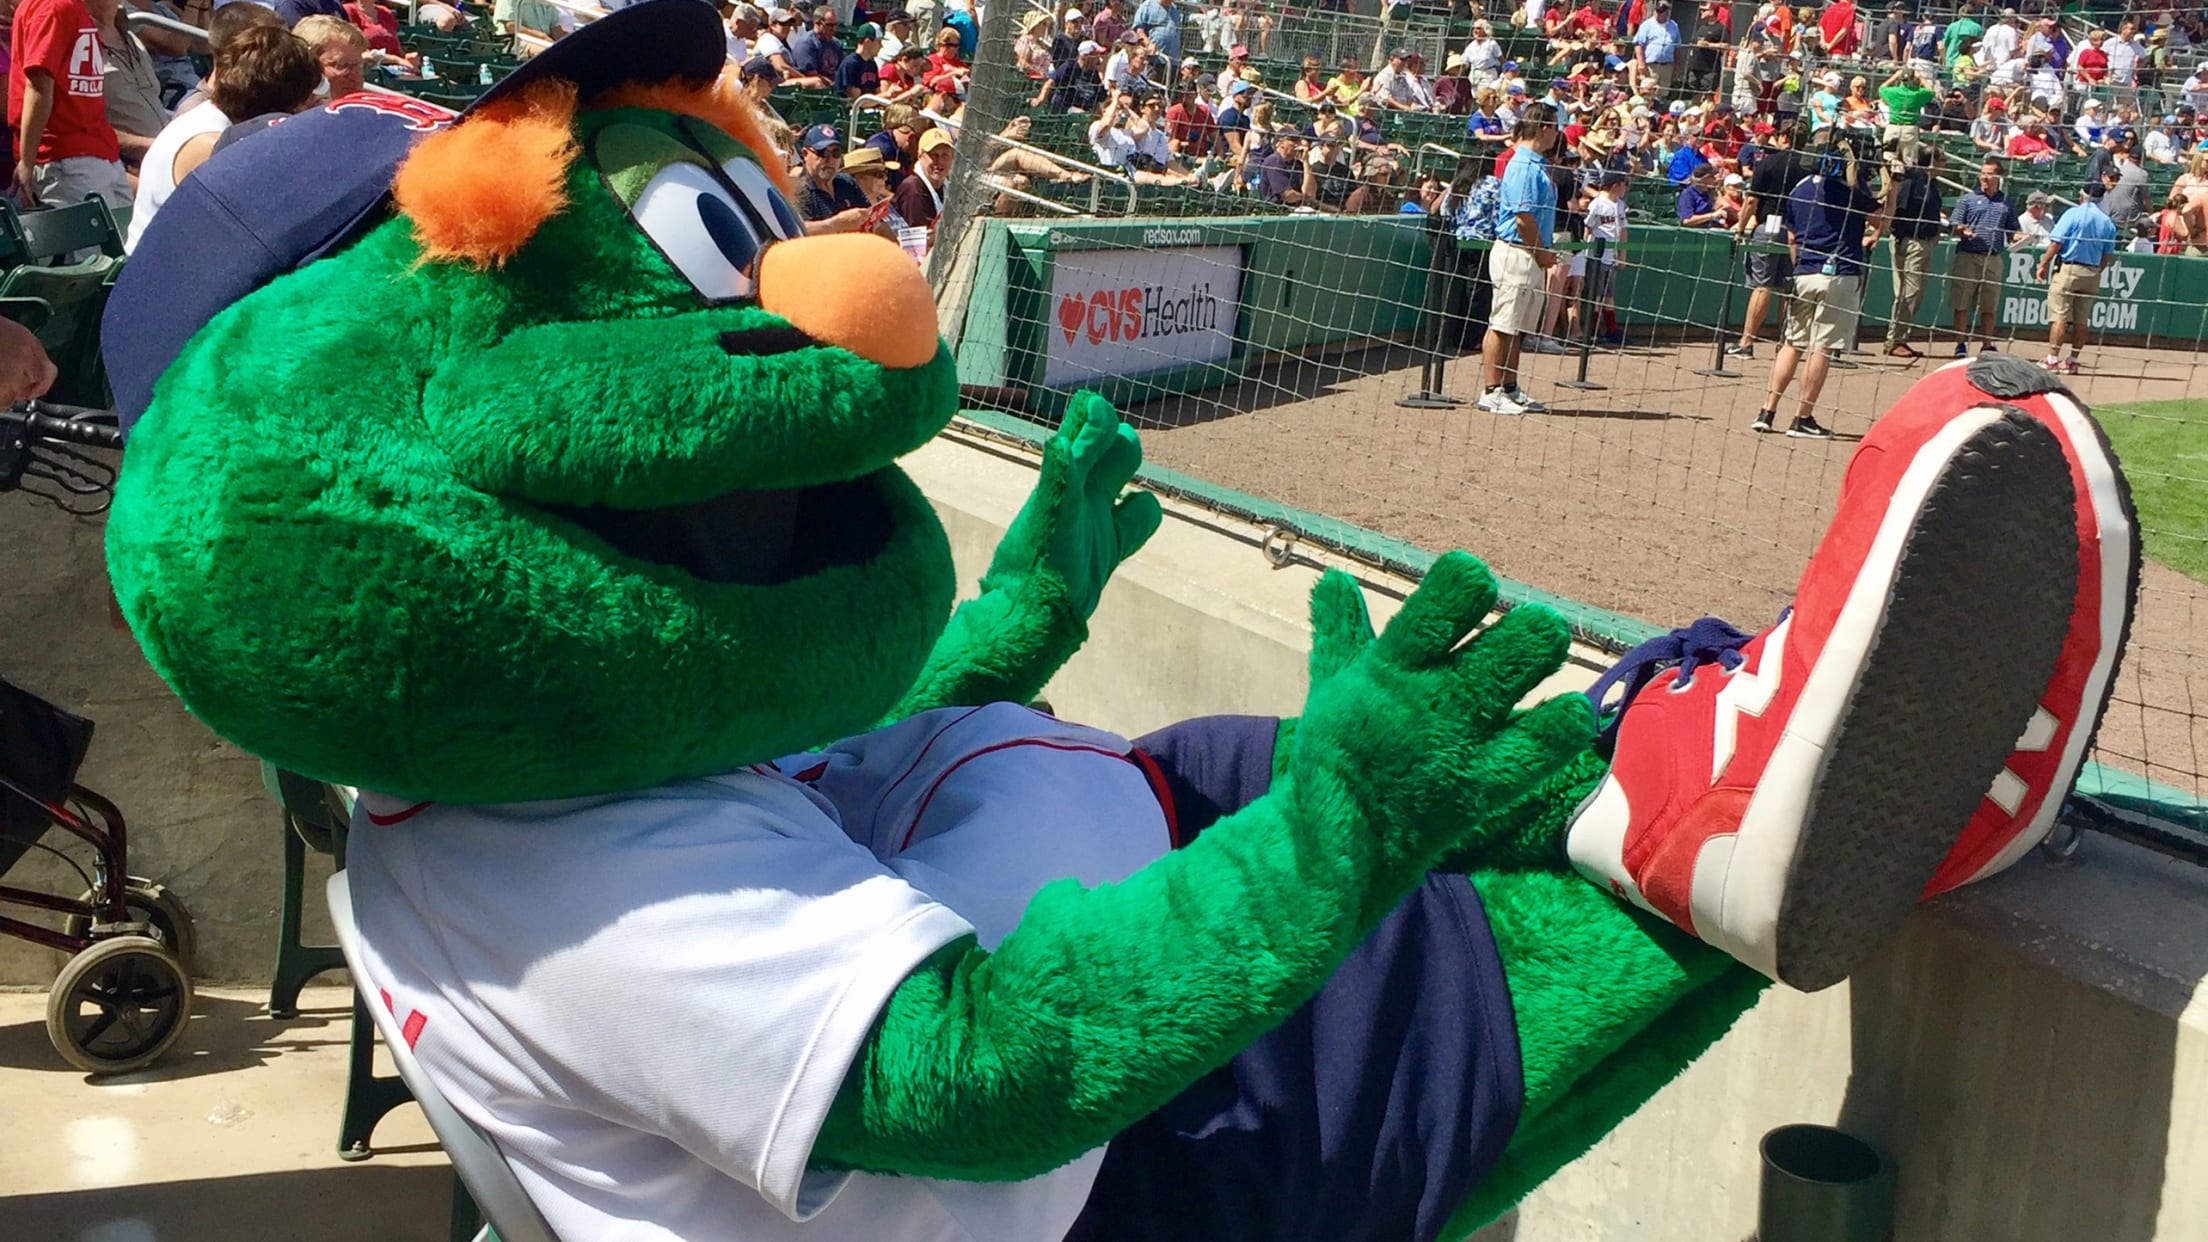 Wally's Opening Day' Rekindles New Spring Tradition For Red Sox Fans 